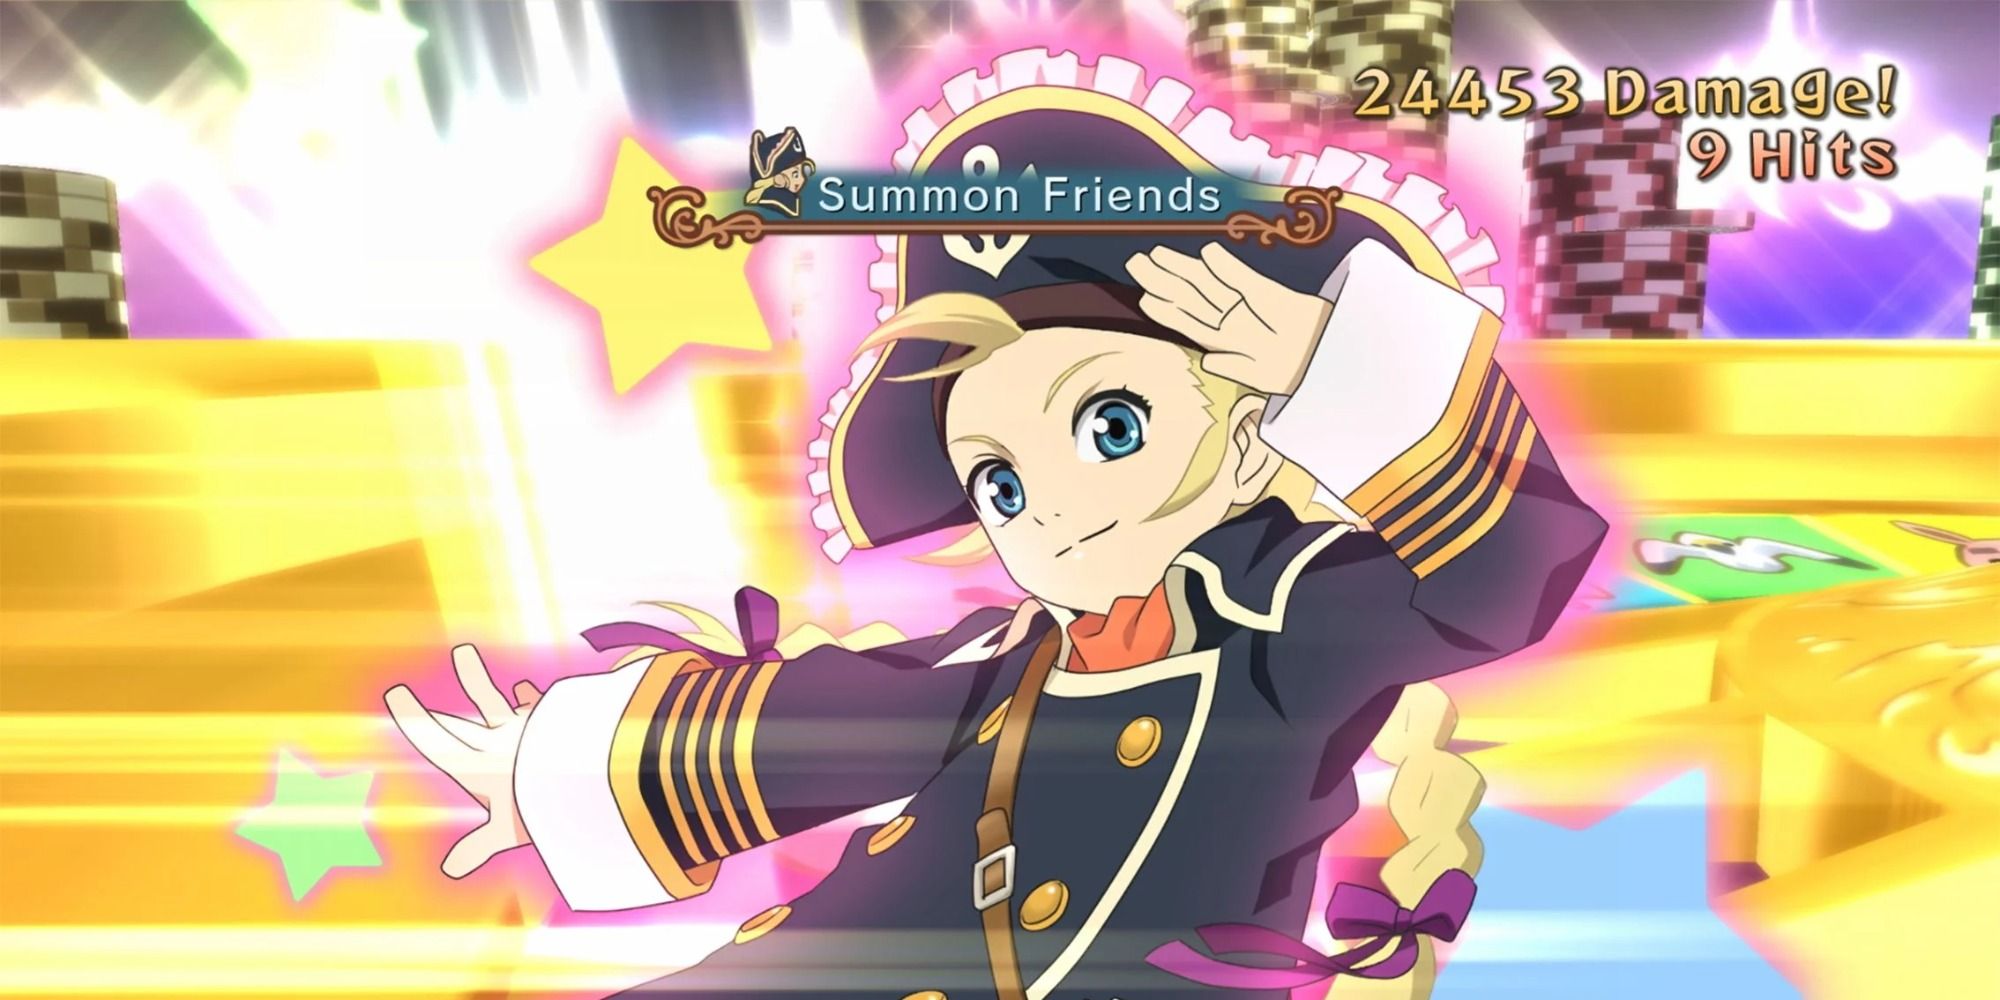 Patty using her Summon Friends ability in Tales of Vesperia